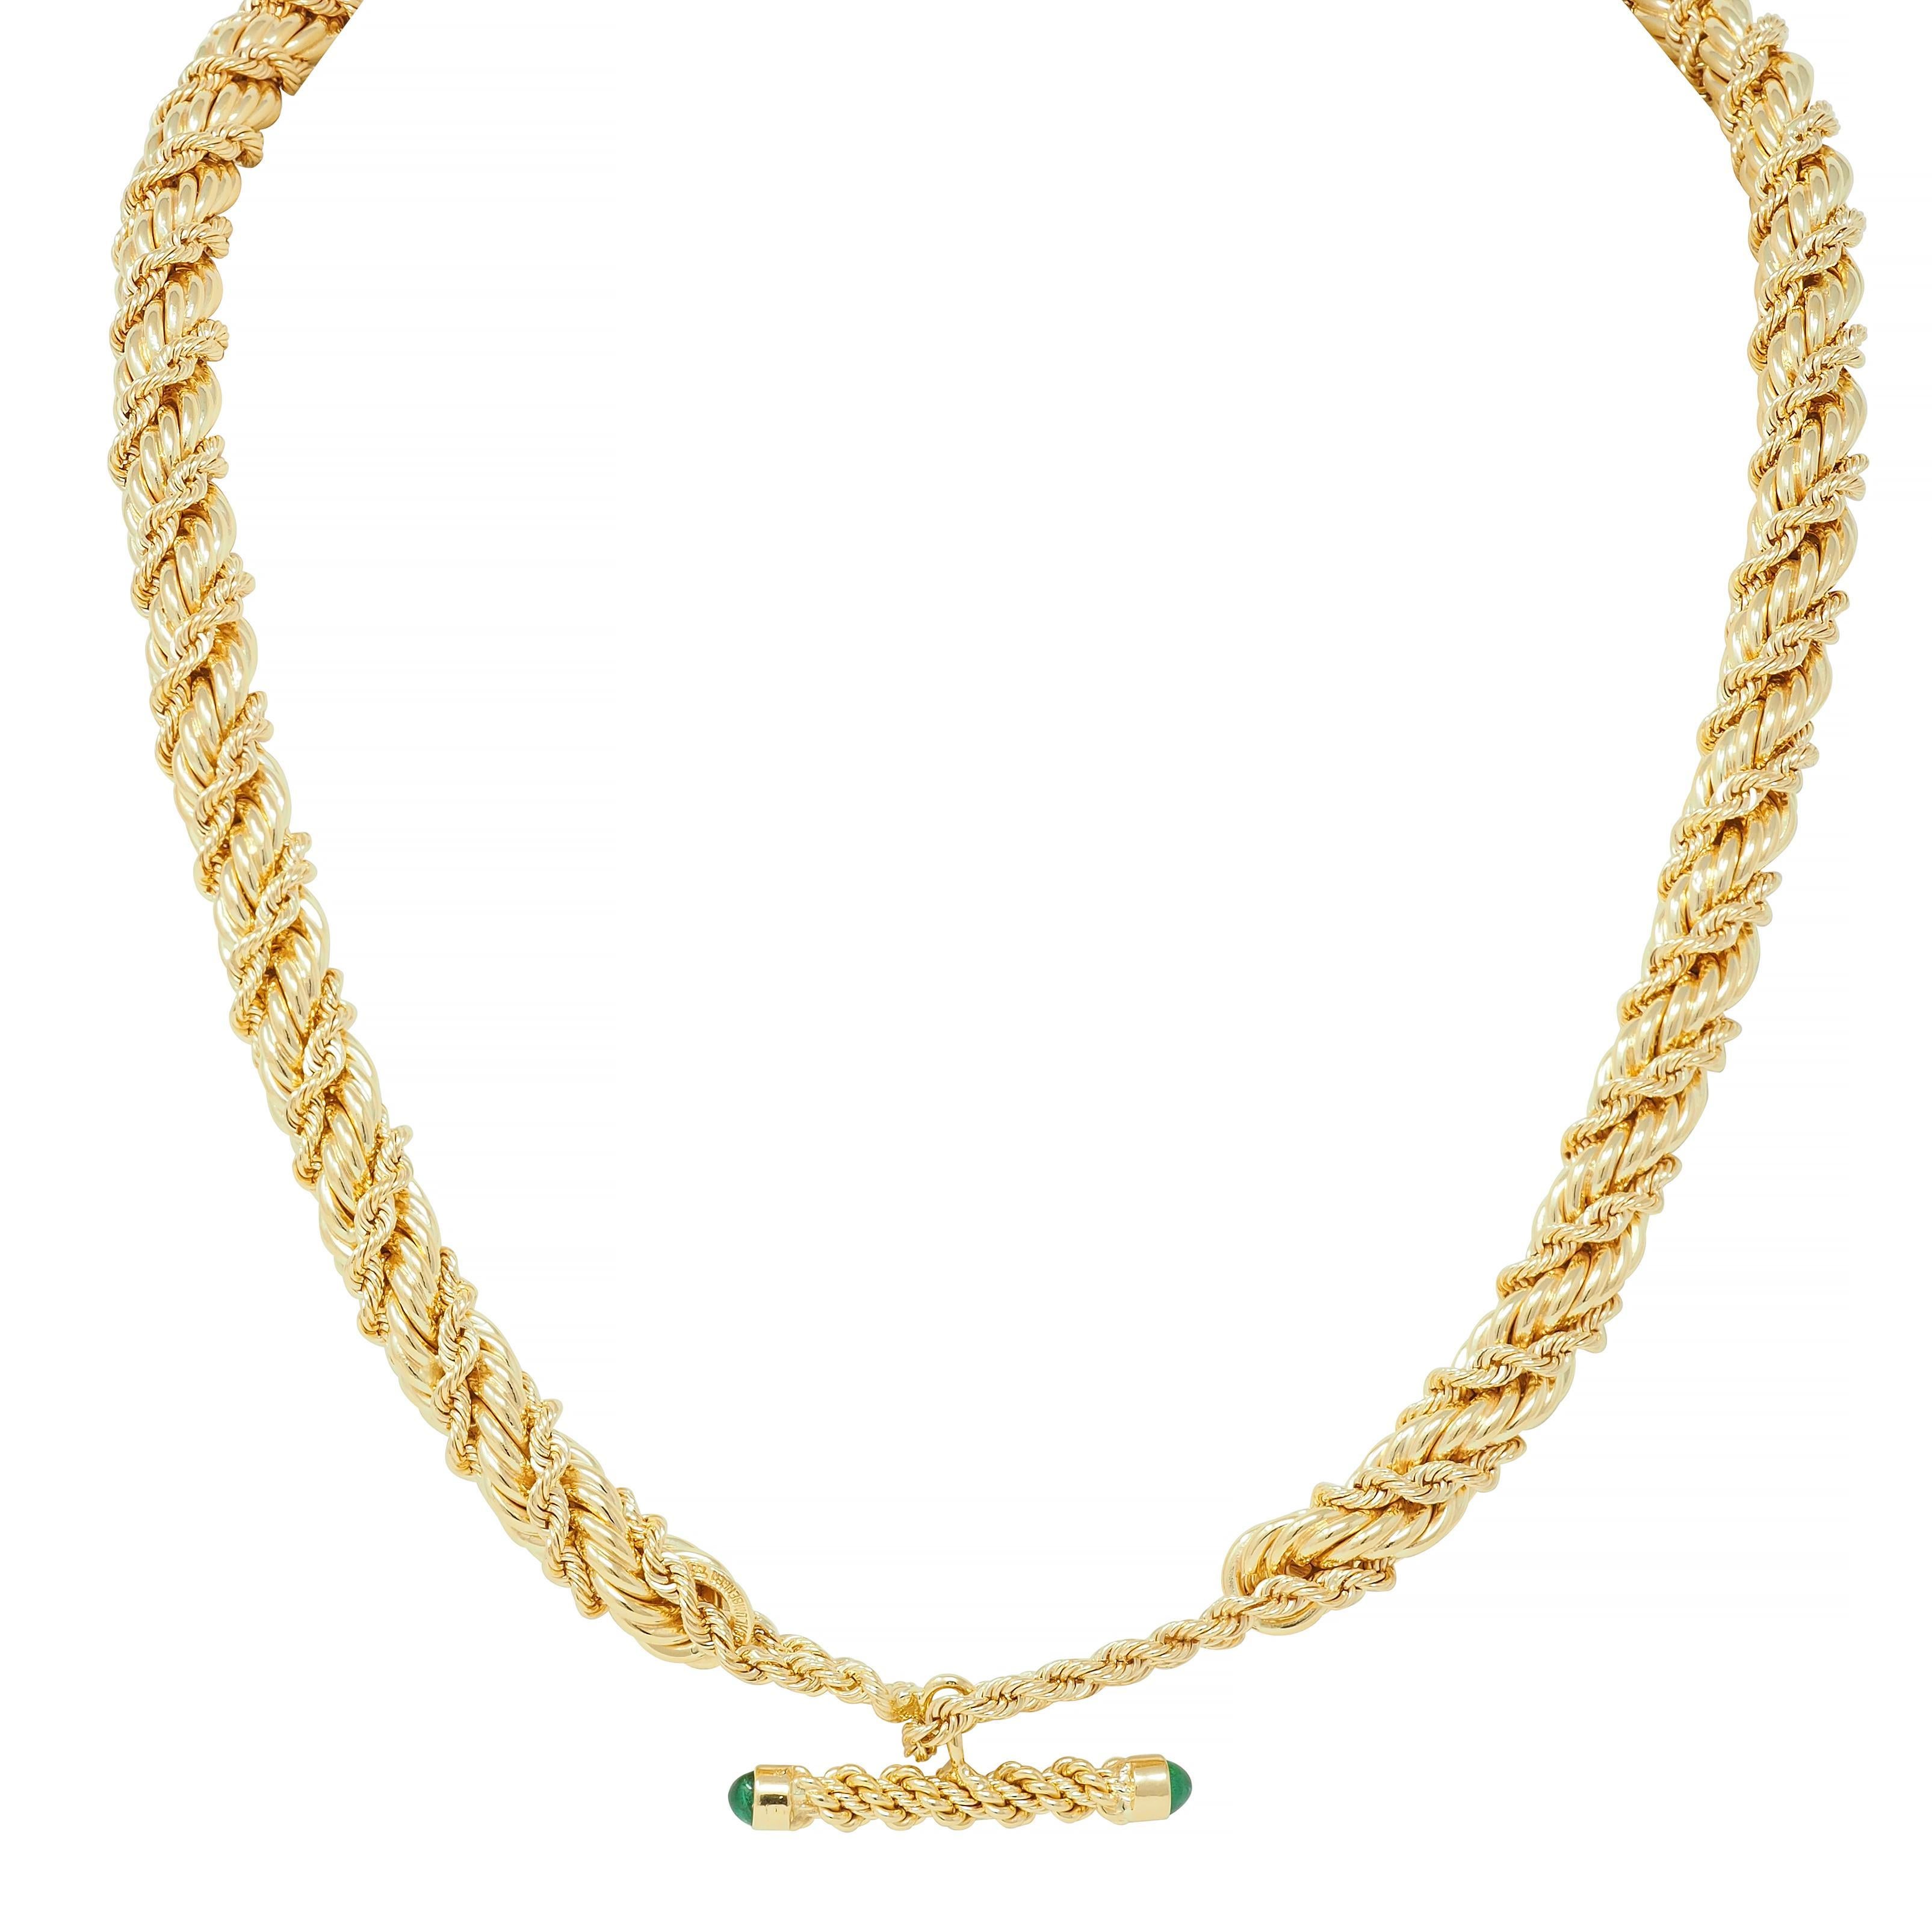 Women's or Men's Schlumberger Tiffany & Co. Emerald 18 Karat Gold Twisted Rope Vintage Necklace